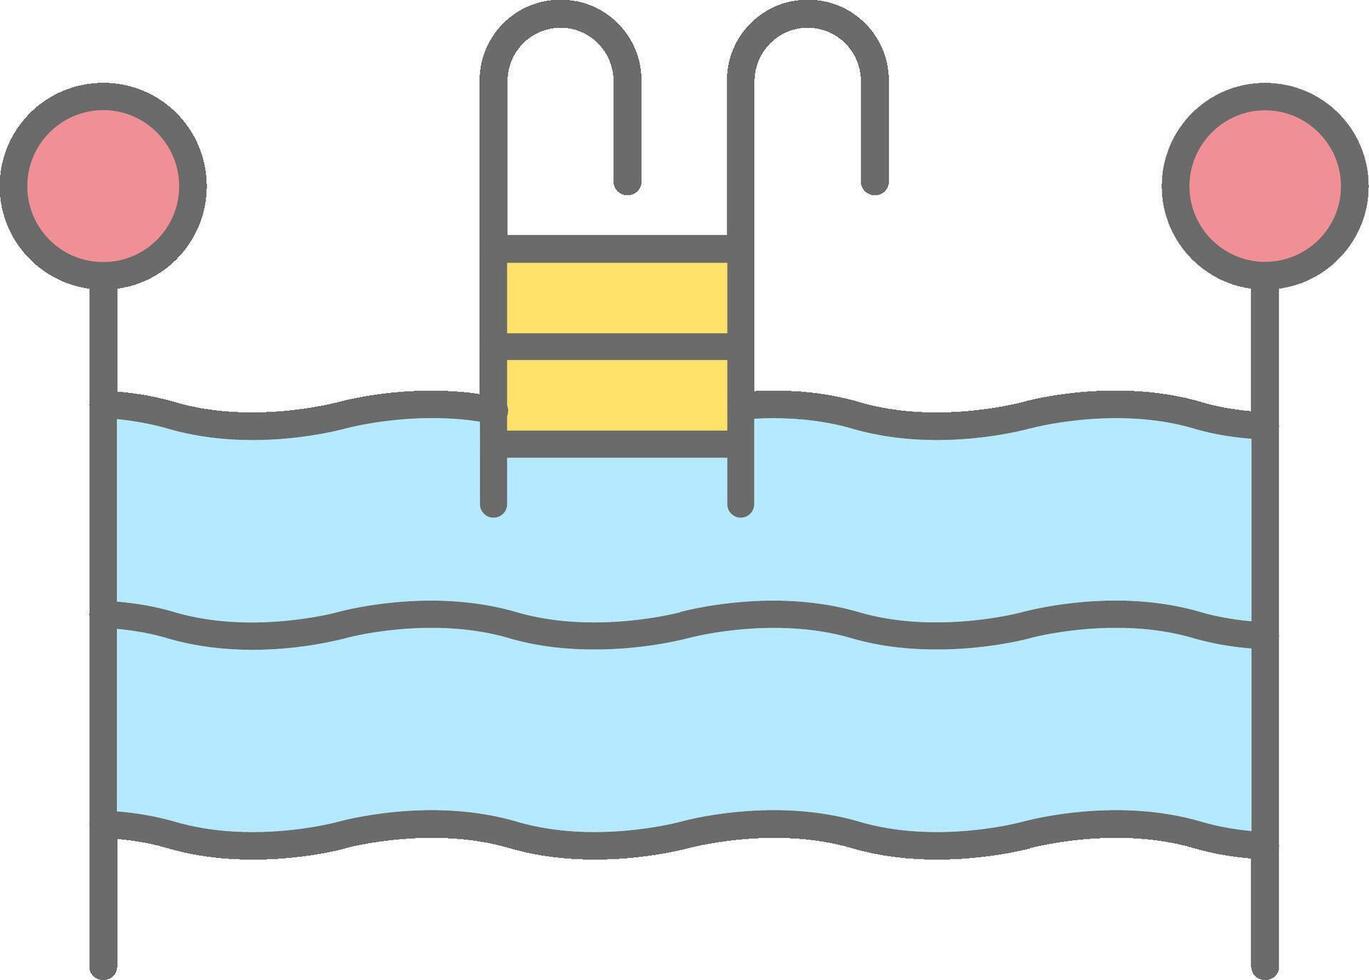 Swimming Pool Line Filled Light Icon vector